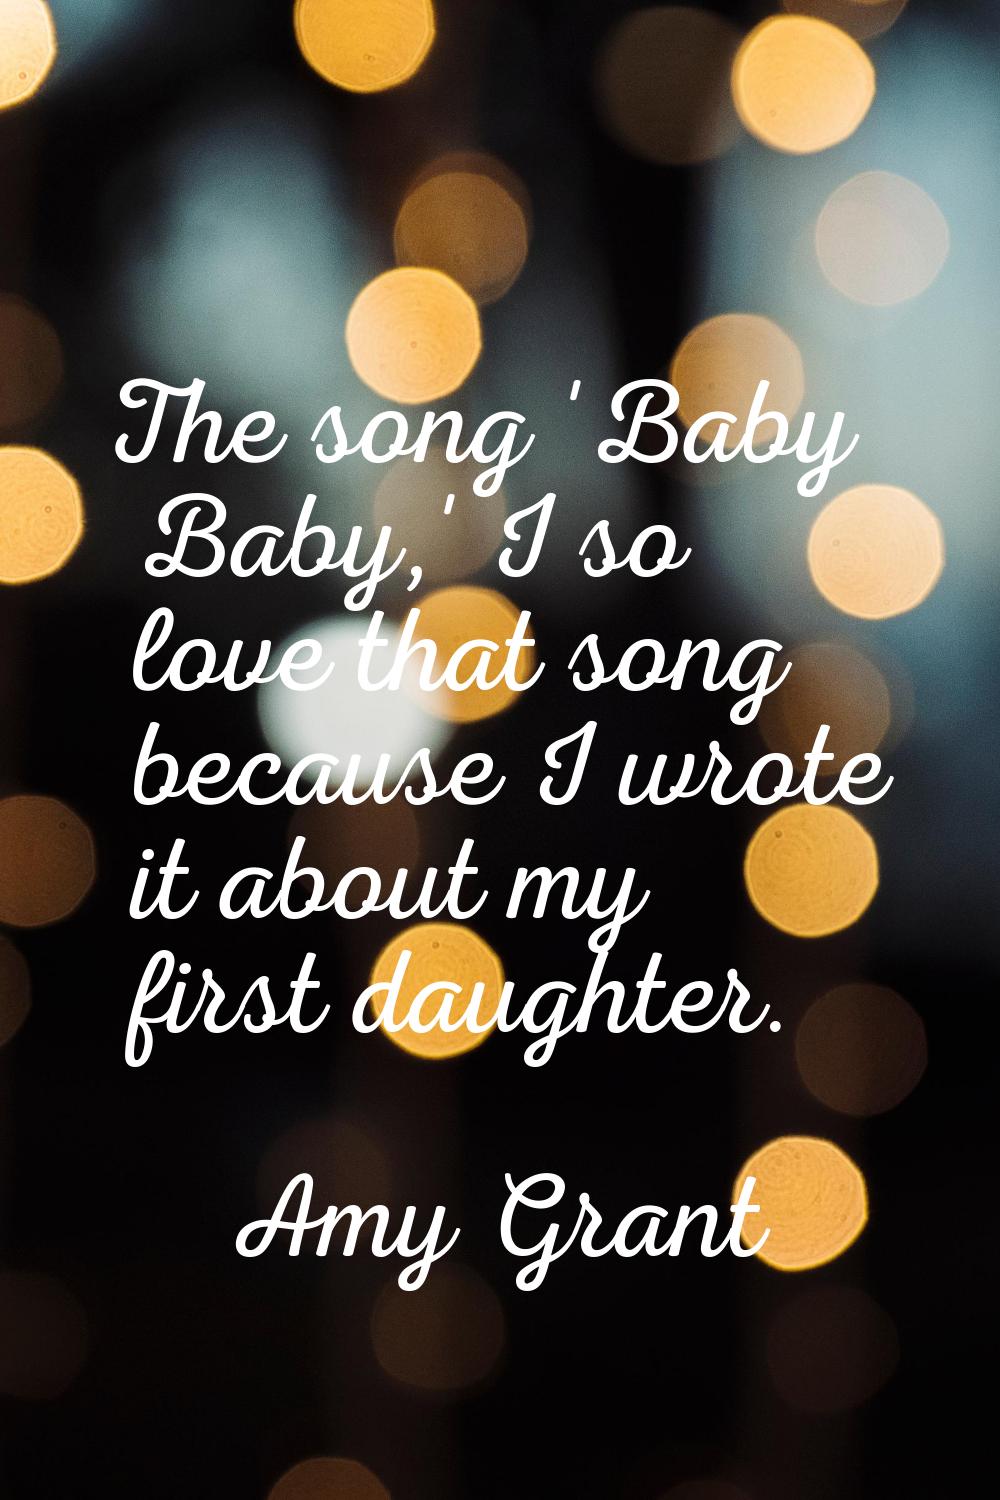 The song 'Baby Baby,' I so love that song because I wrote it about my first daughter.